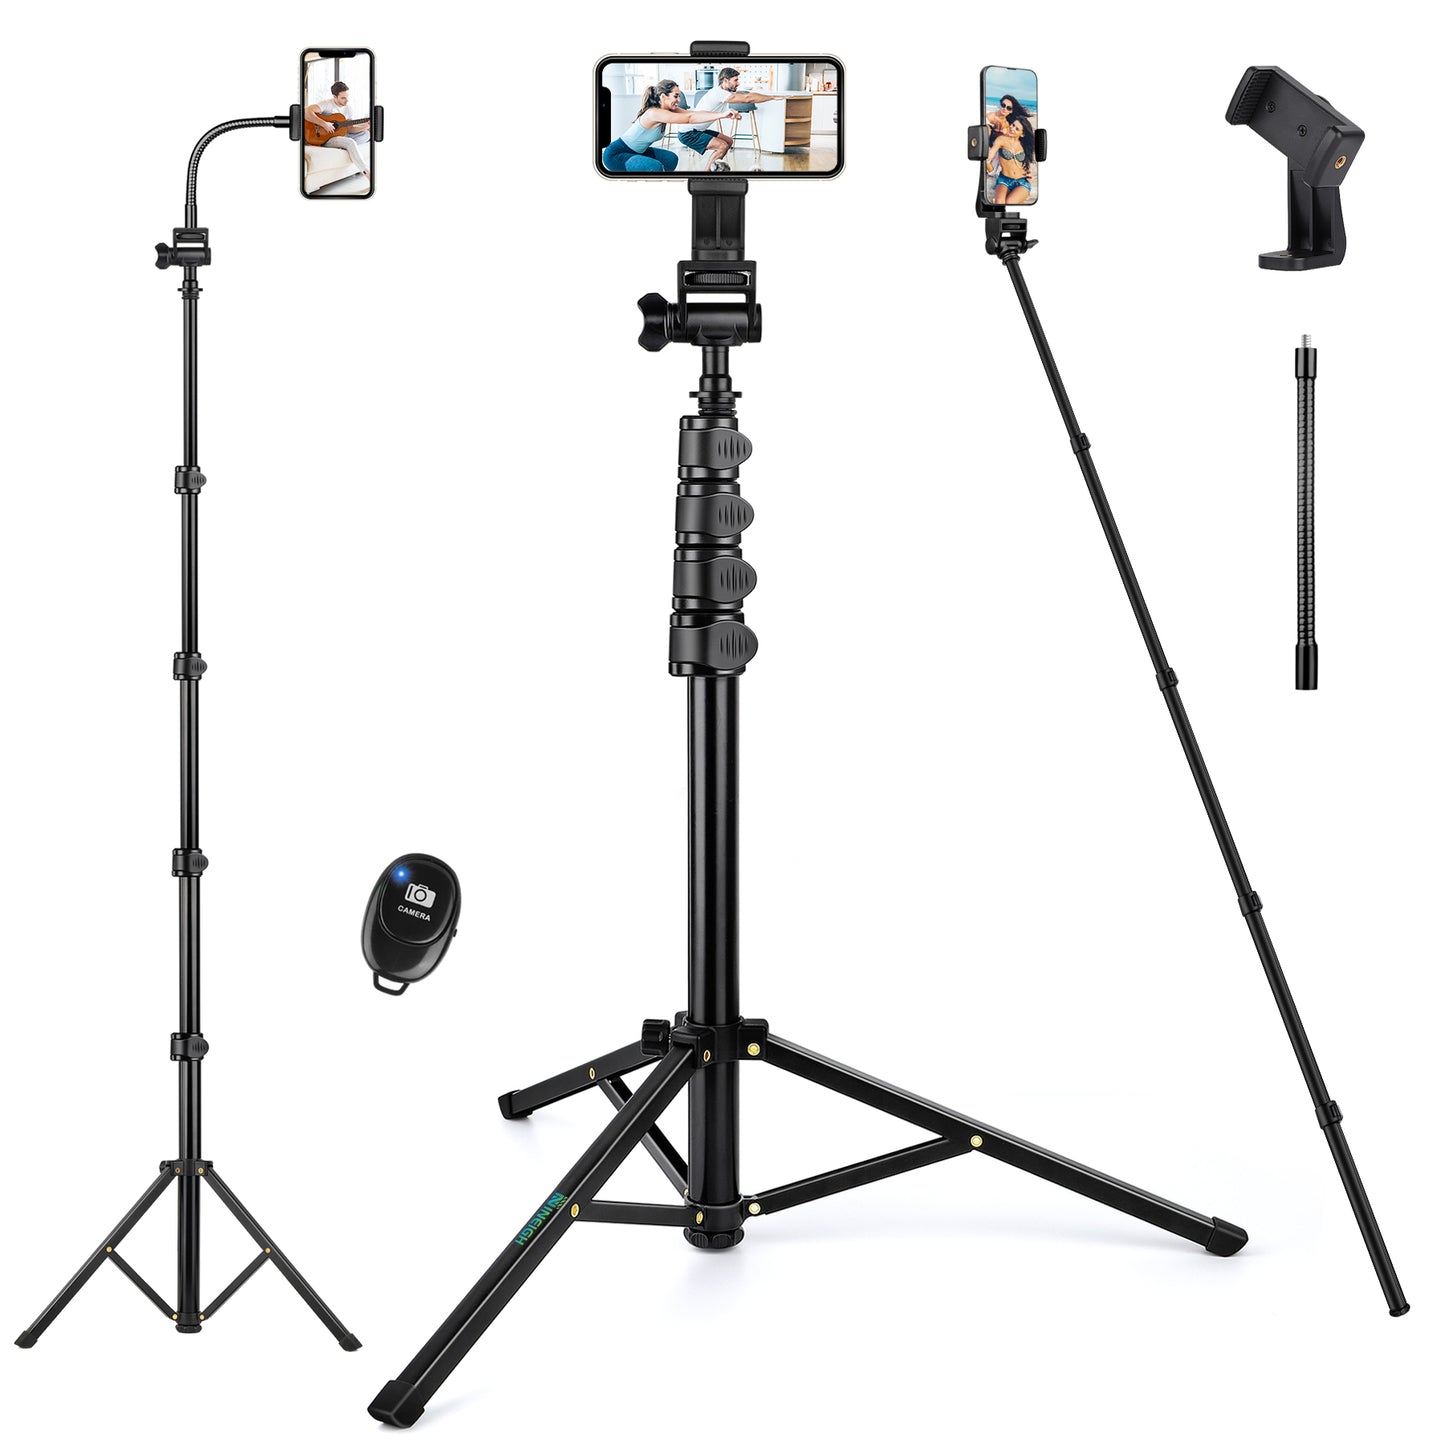 Nineigh Phone Tripod Stand, 72" Selfie Stick Tripod Portable Travel Tripods, Aluminum Hose Phone Stand Tripod for Video Recording Photo Vlog Compatible with iPhone Plus iPad Cellphone Cameras(USA)